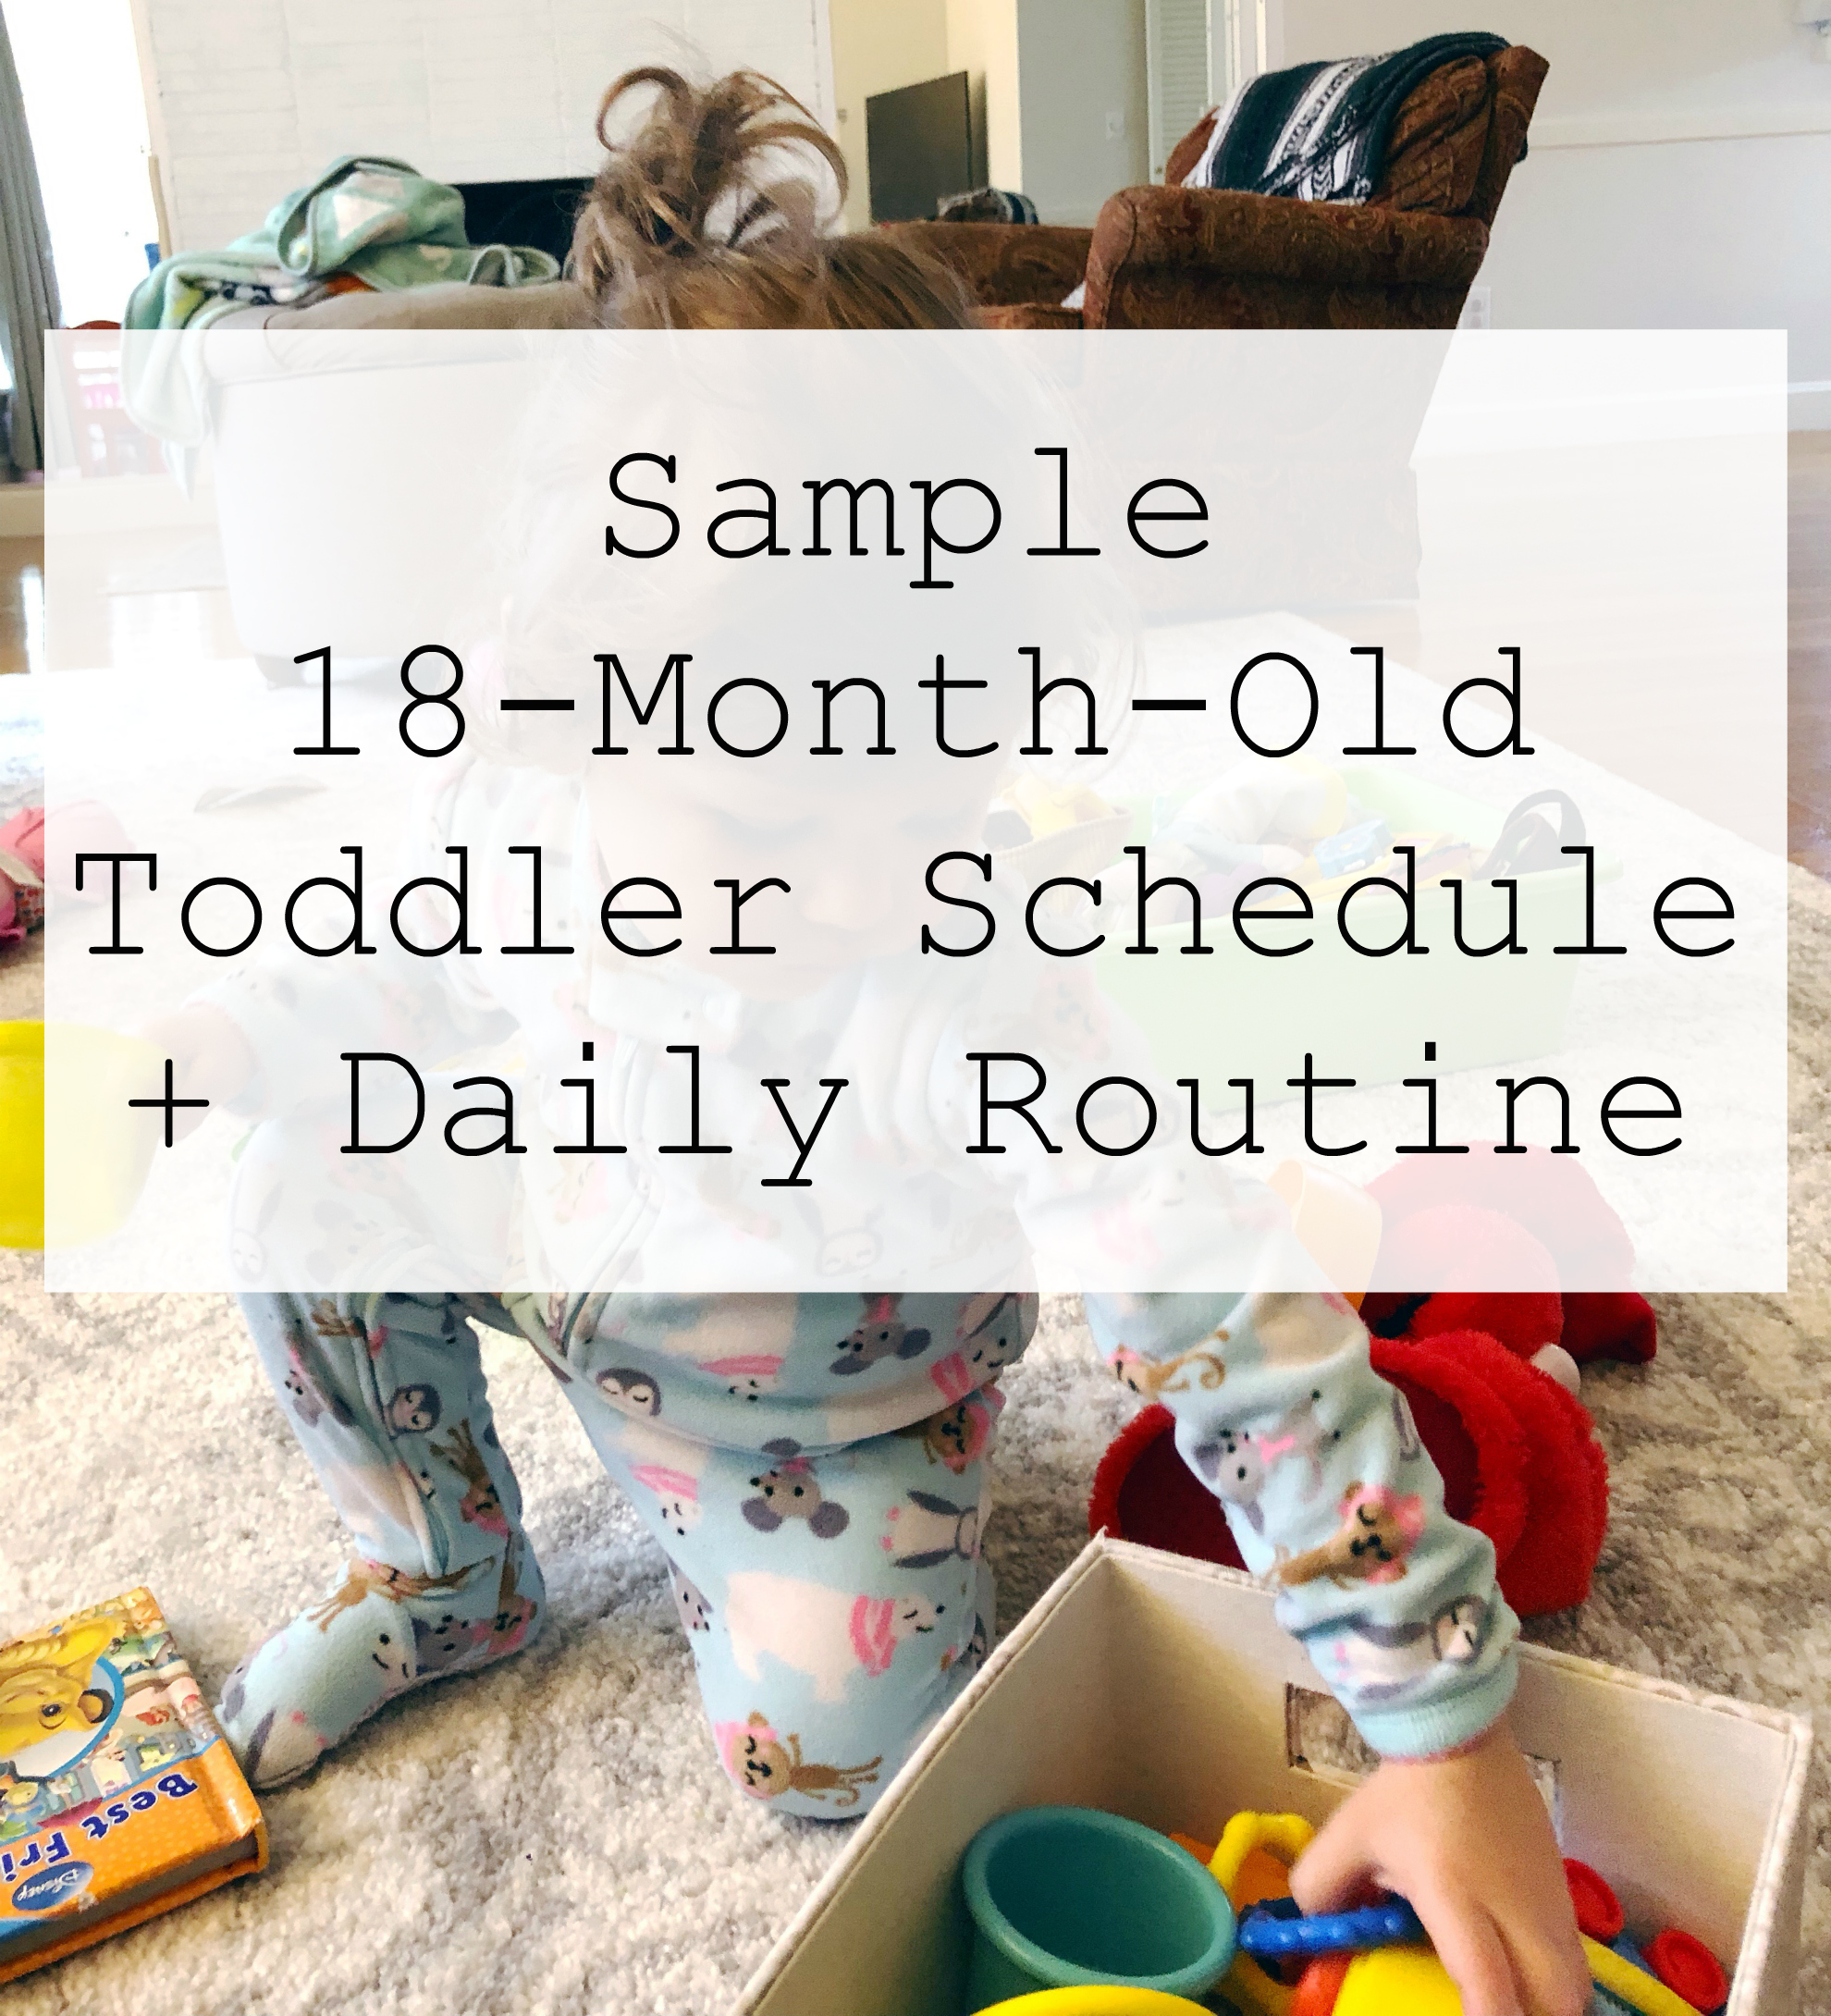 Sample Daily Routine (18 Month Old Toddler Schedule)